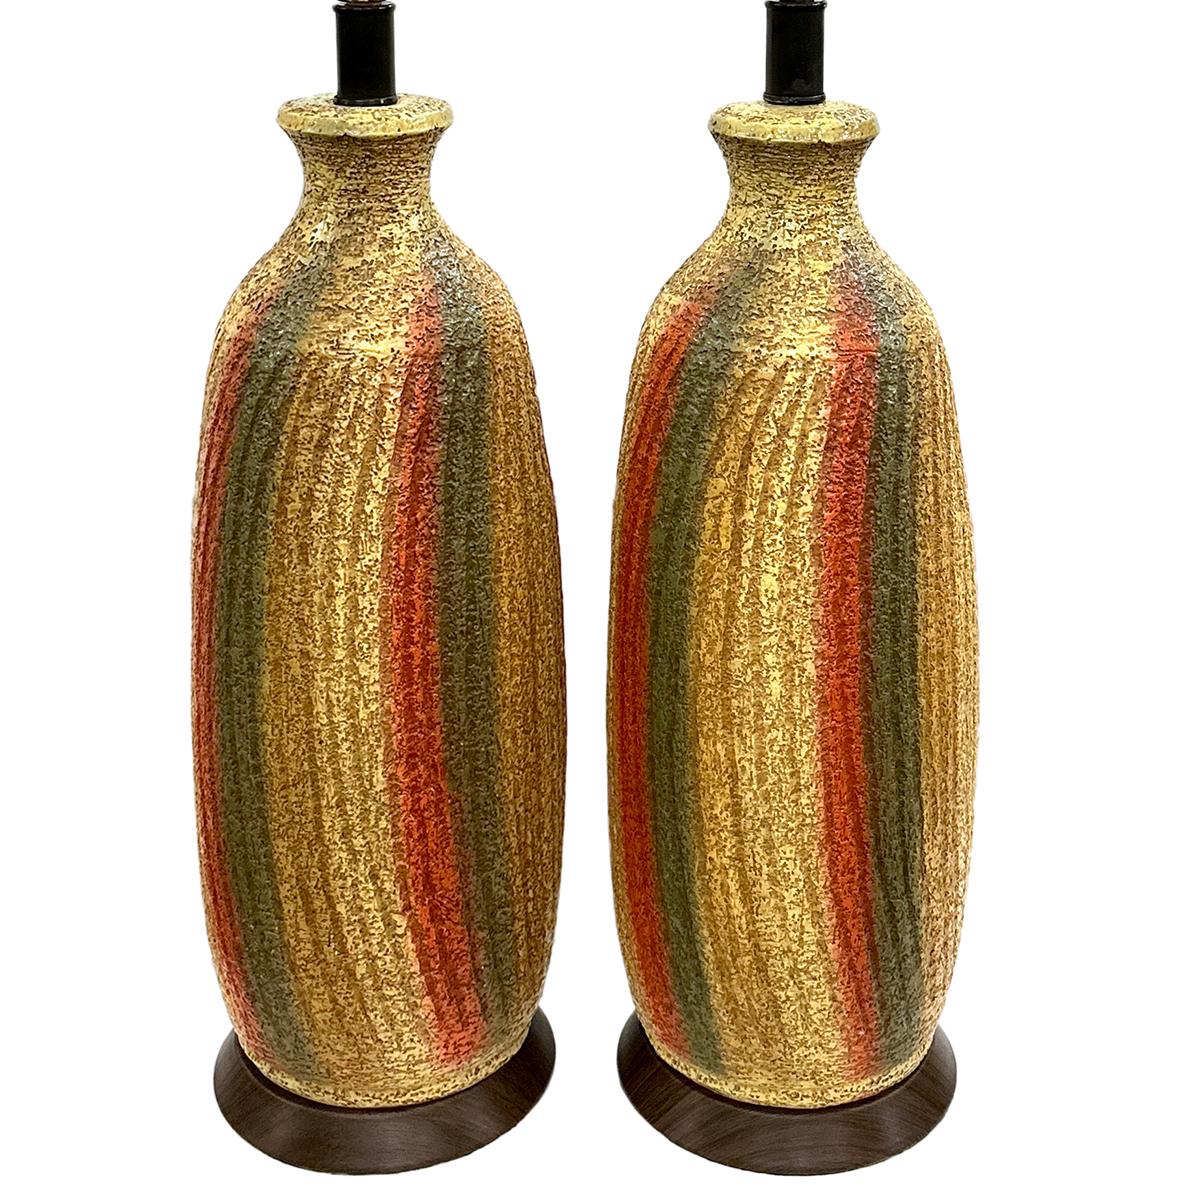 Pair of circa 1960's Italian striped lamps with yellows and oranges.

Measurements:
Height of body: 23